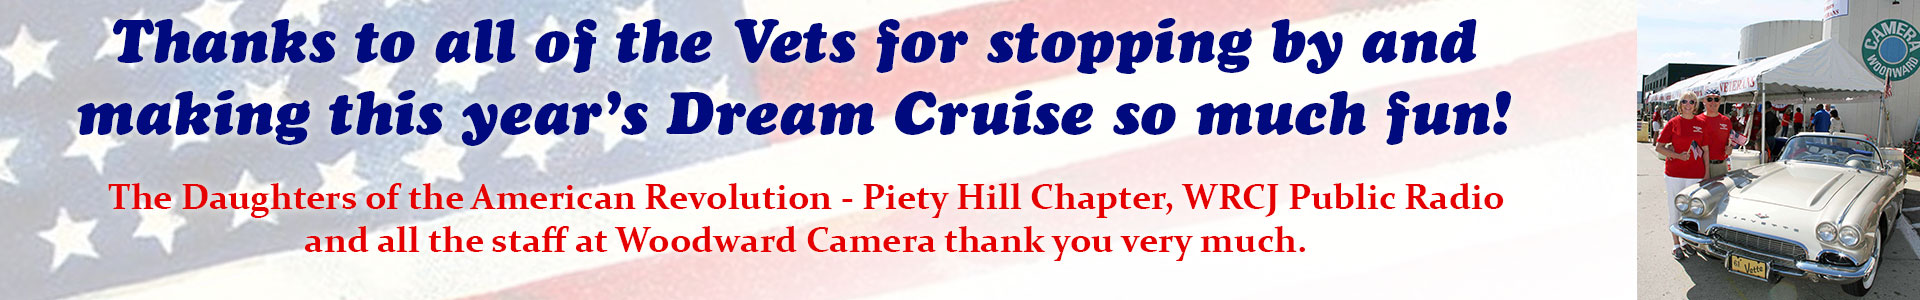 Woodward Camera would like to thank all the veterans who joined us for the 2015 Dream Cruise.